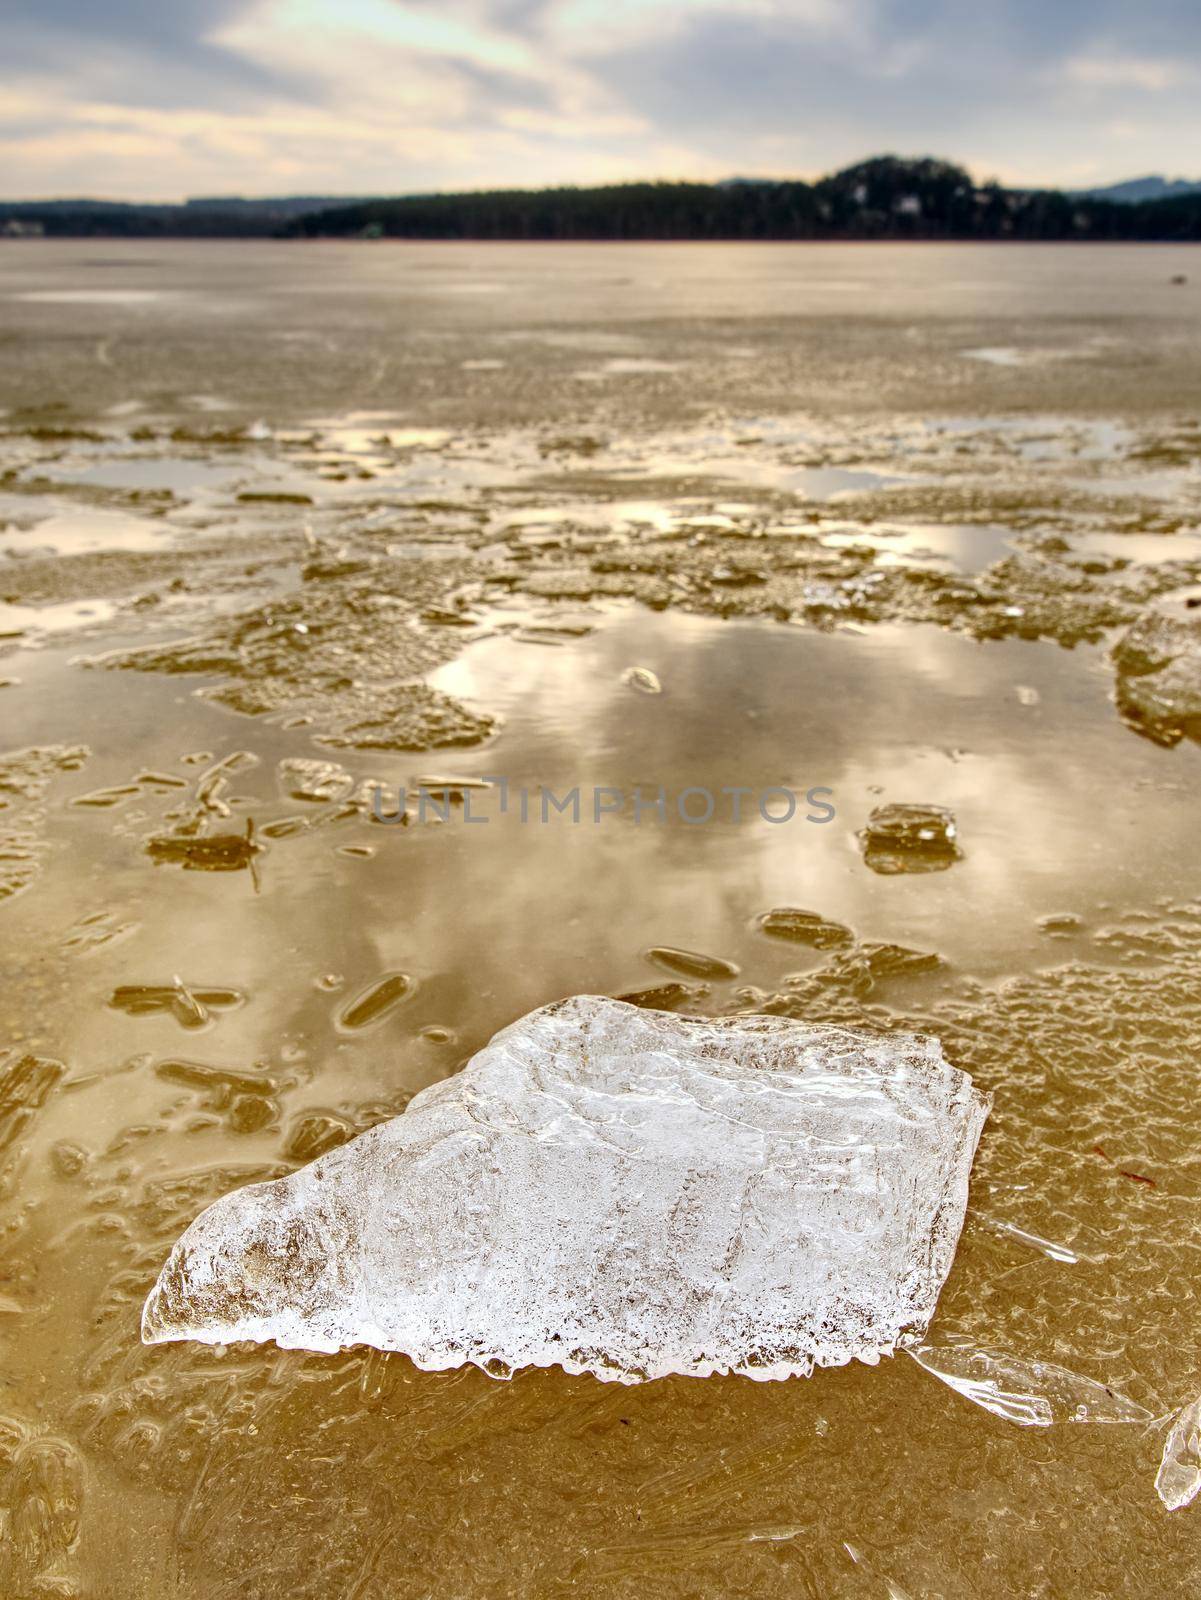 Winter natural wonder. Yellow pieces of snow melting on beach. Wonderful nature c by rdonar2